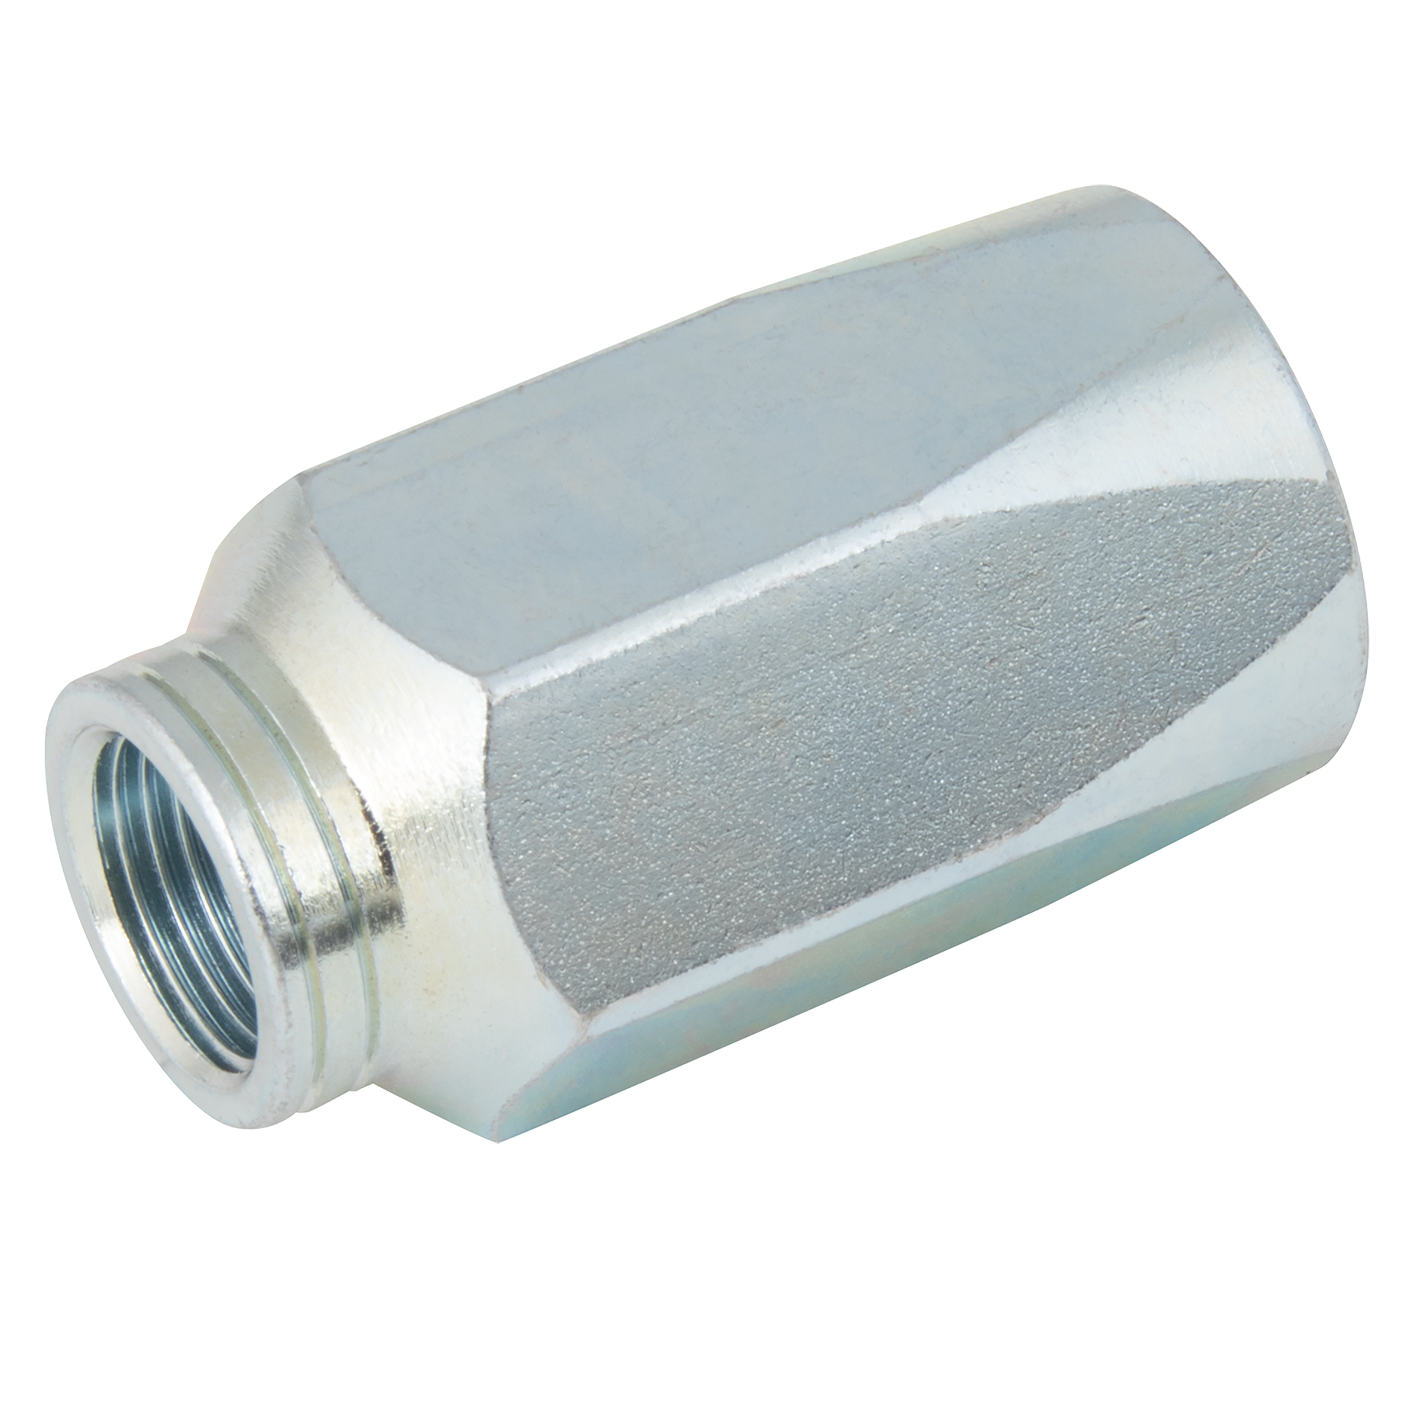 Hydraulic Reusable Ferrule R2AT Non-skive Hose ID 3/8"